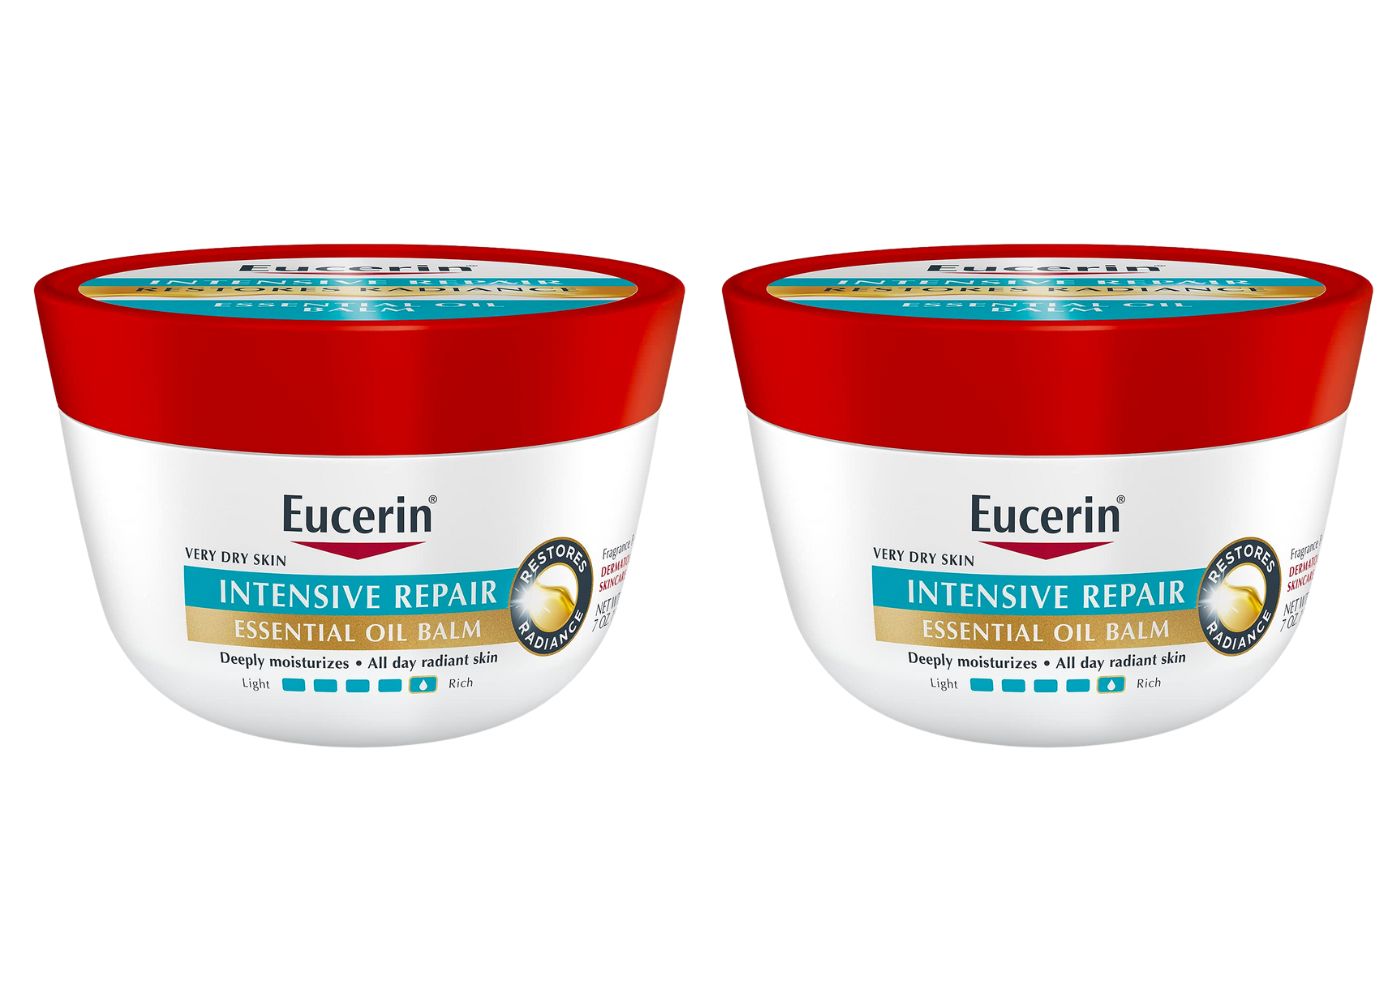 7-Oz Eucerin Intensive Repair Essential Oil Balm (Very Dry Skin) 2 for $12.08 ($6.04 each) w/ S&S + Free Shipping w/ Prime or on $35+